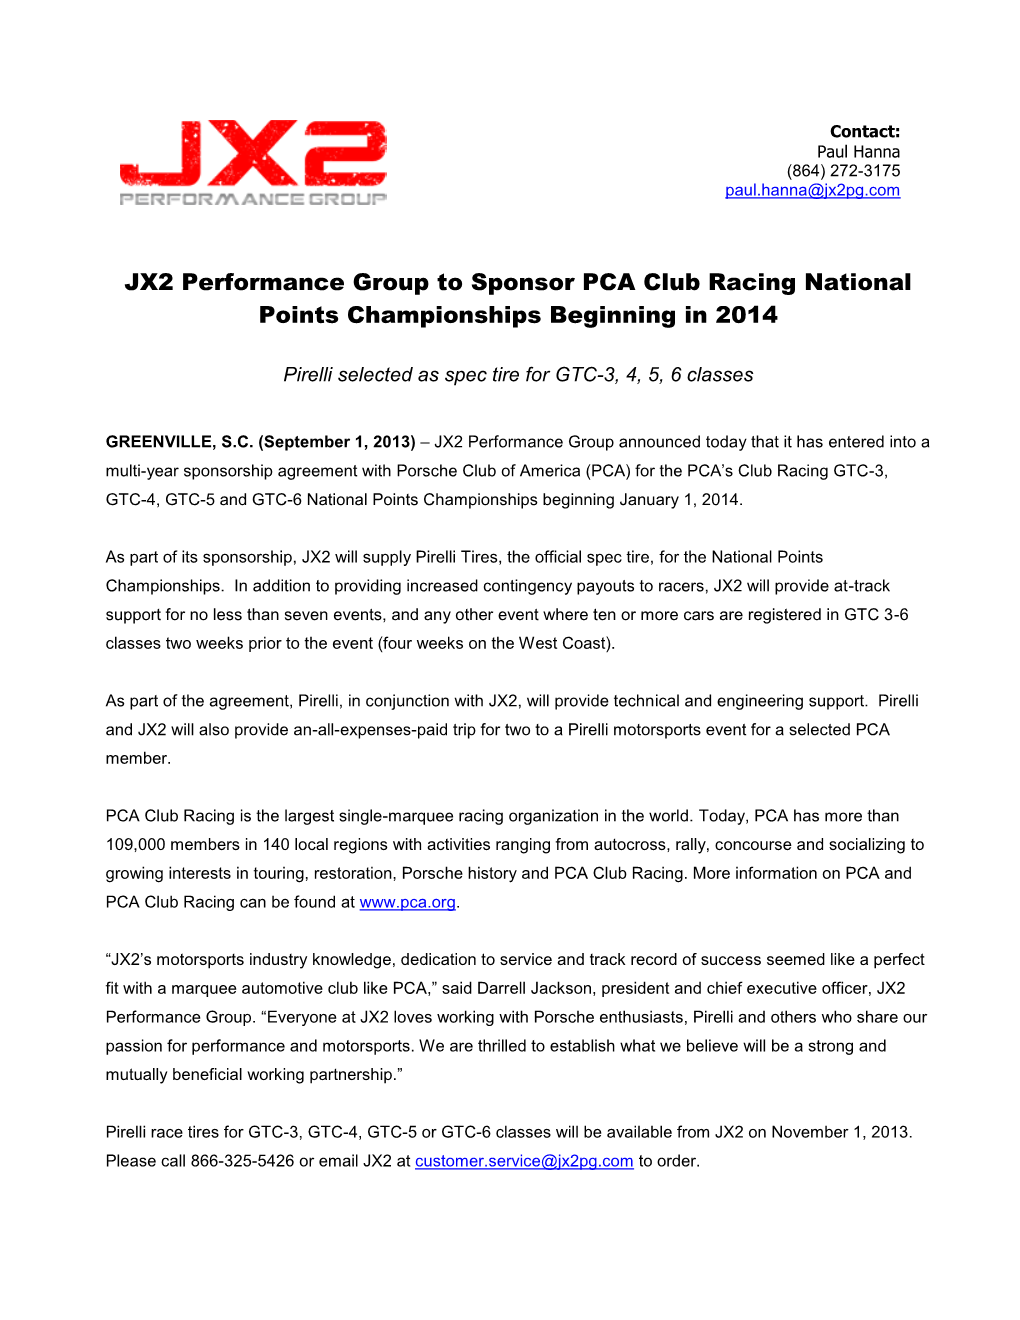 JX2 Performance Group to Sponsor PCA Club Racing National Points Championships Beginning in 2014